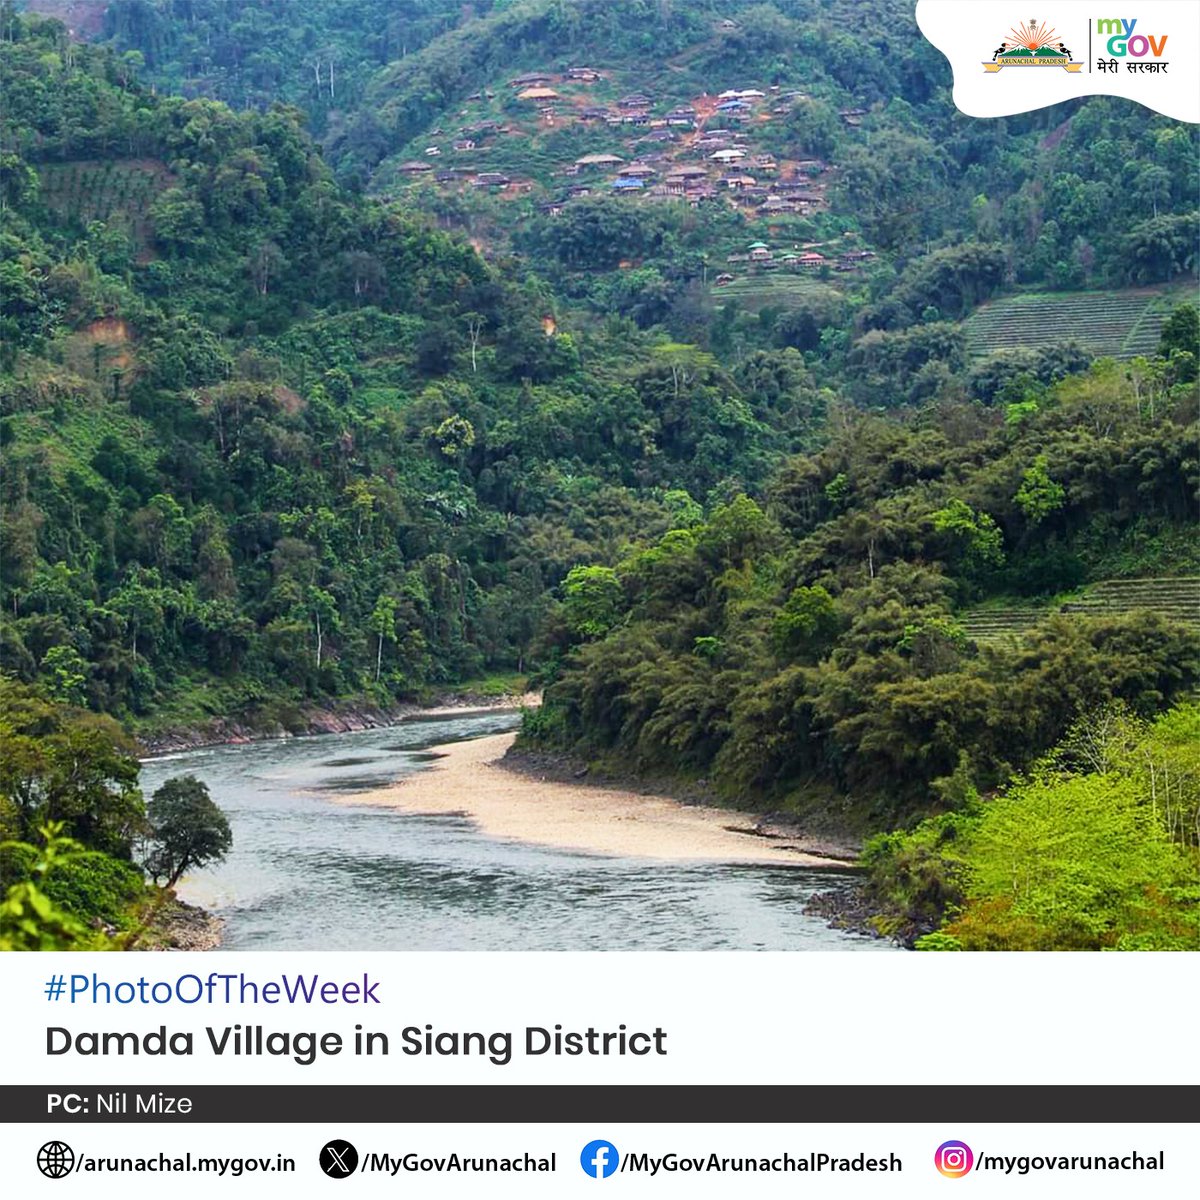 #PhotoOfTheWeek

Damda, nestled in Siang District, beckons as a tranquil retreat, offering respite from the everyday hustle with its serene landscapes and the gentle flow of the river, creating a heavenly escape.